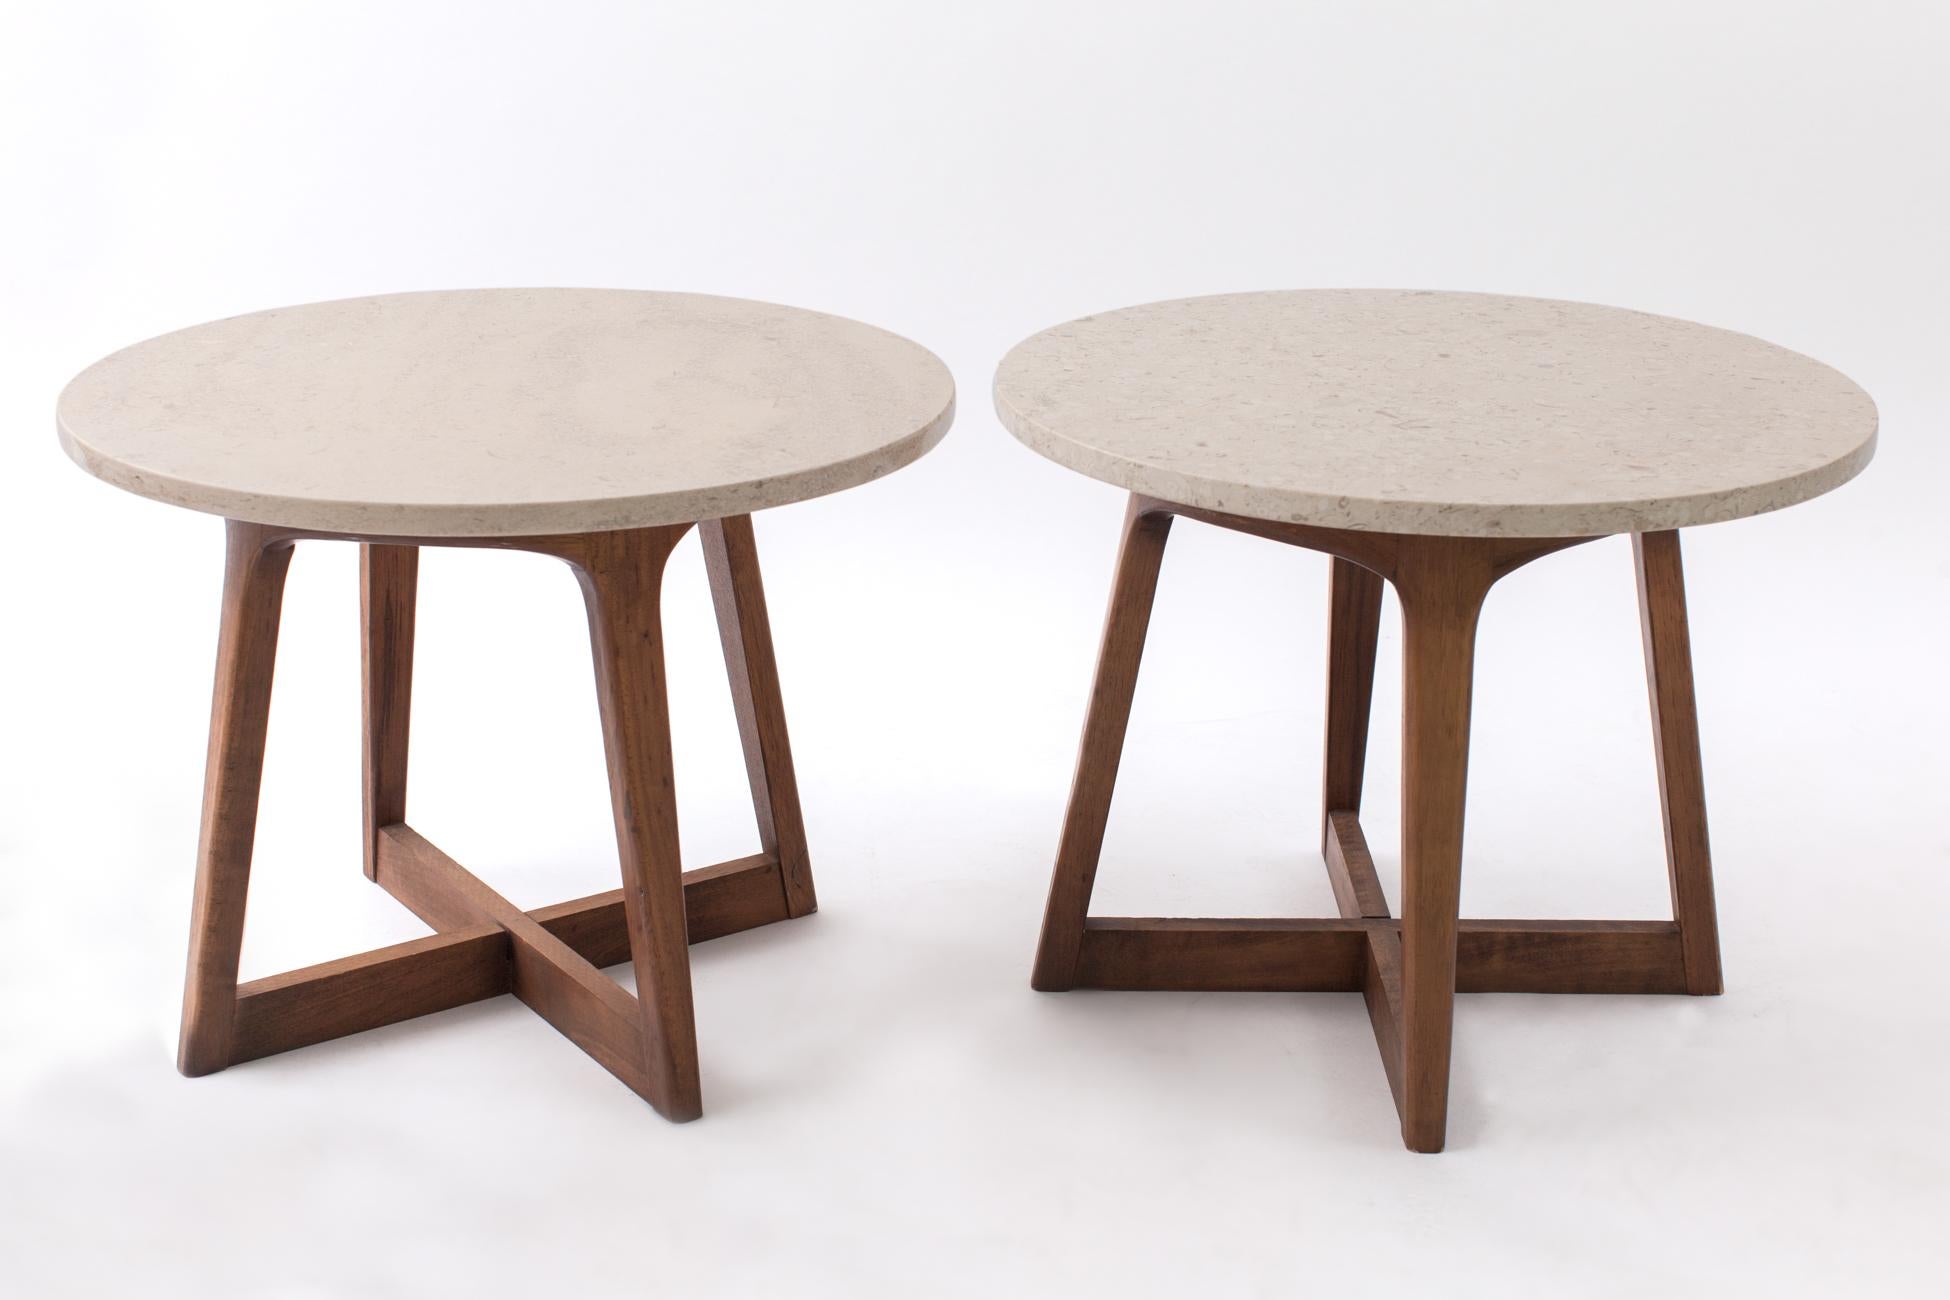 A graceful pair of sculptural end tables, with a circular cream-colored polished limestone top resting on an imbricate X-shape base in carved and tapering walnut, in the style of Adrian Pearsall. The round tops, incrusted with fossilized shells,